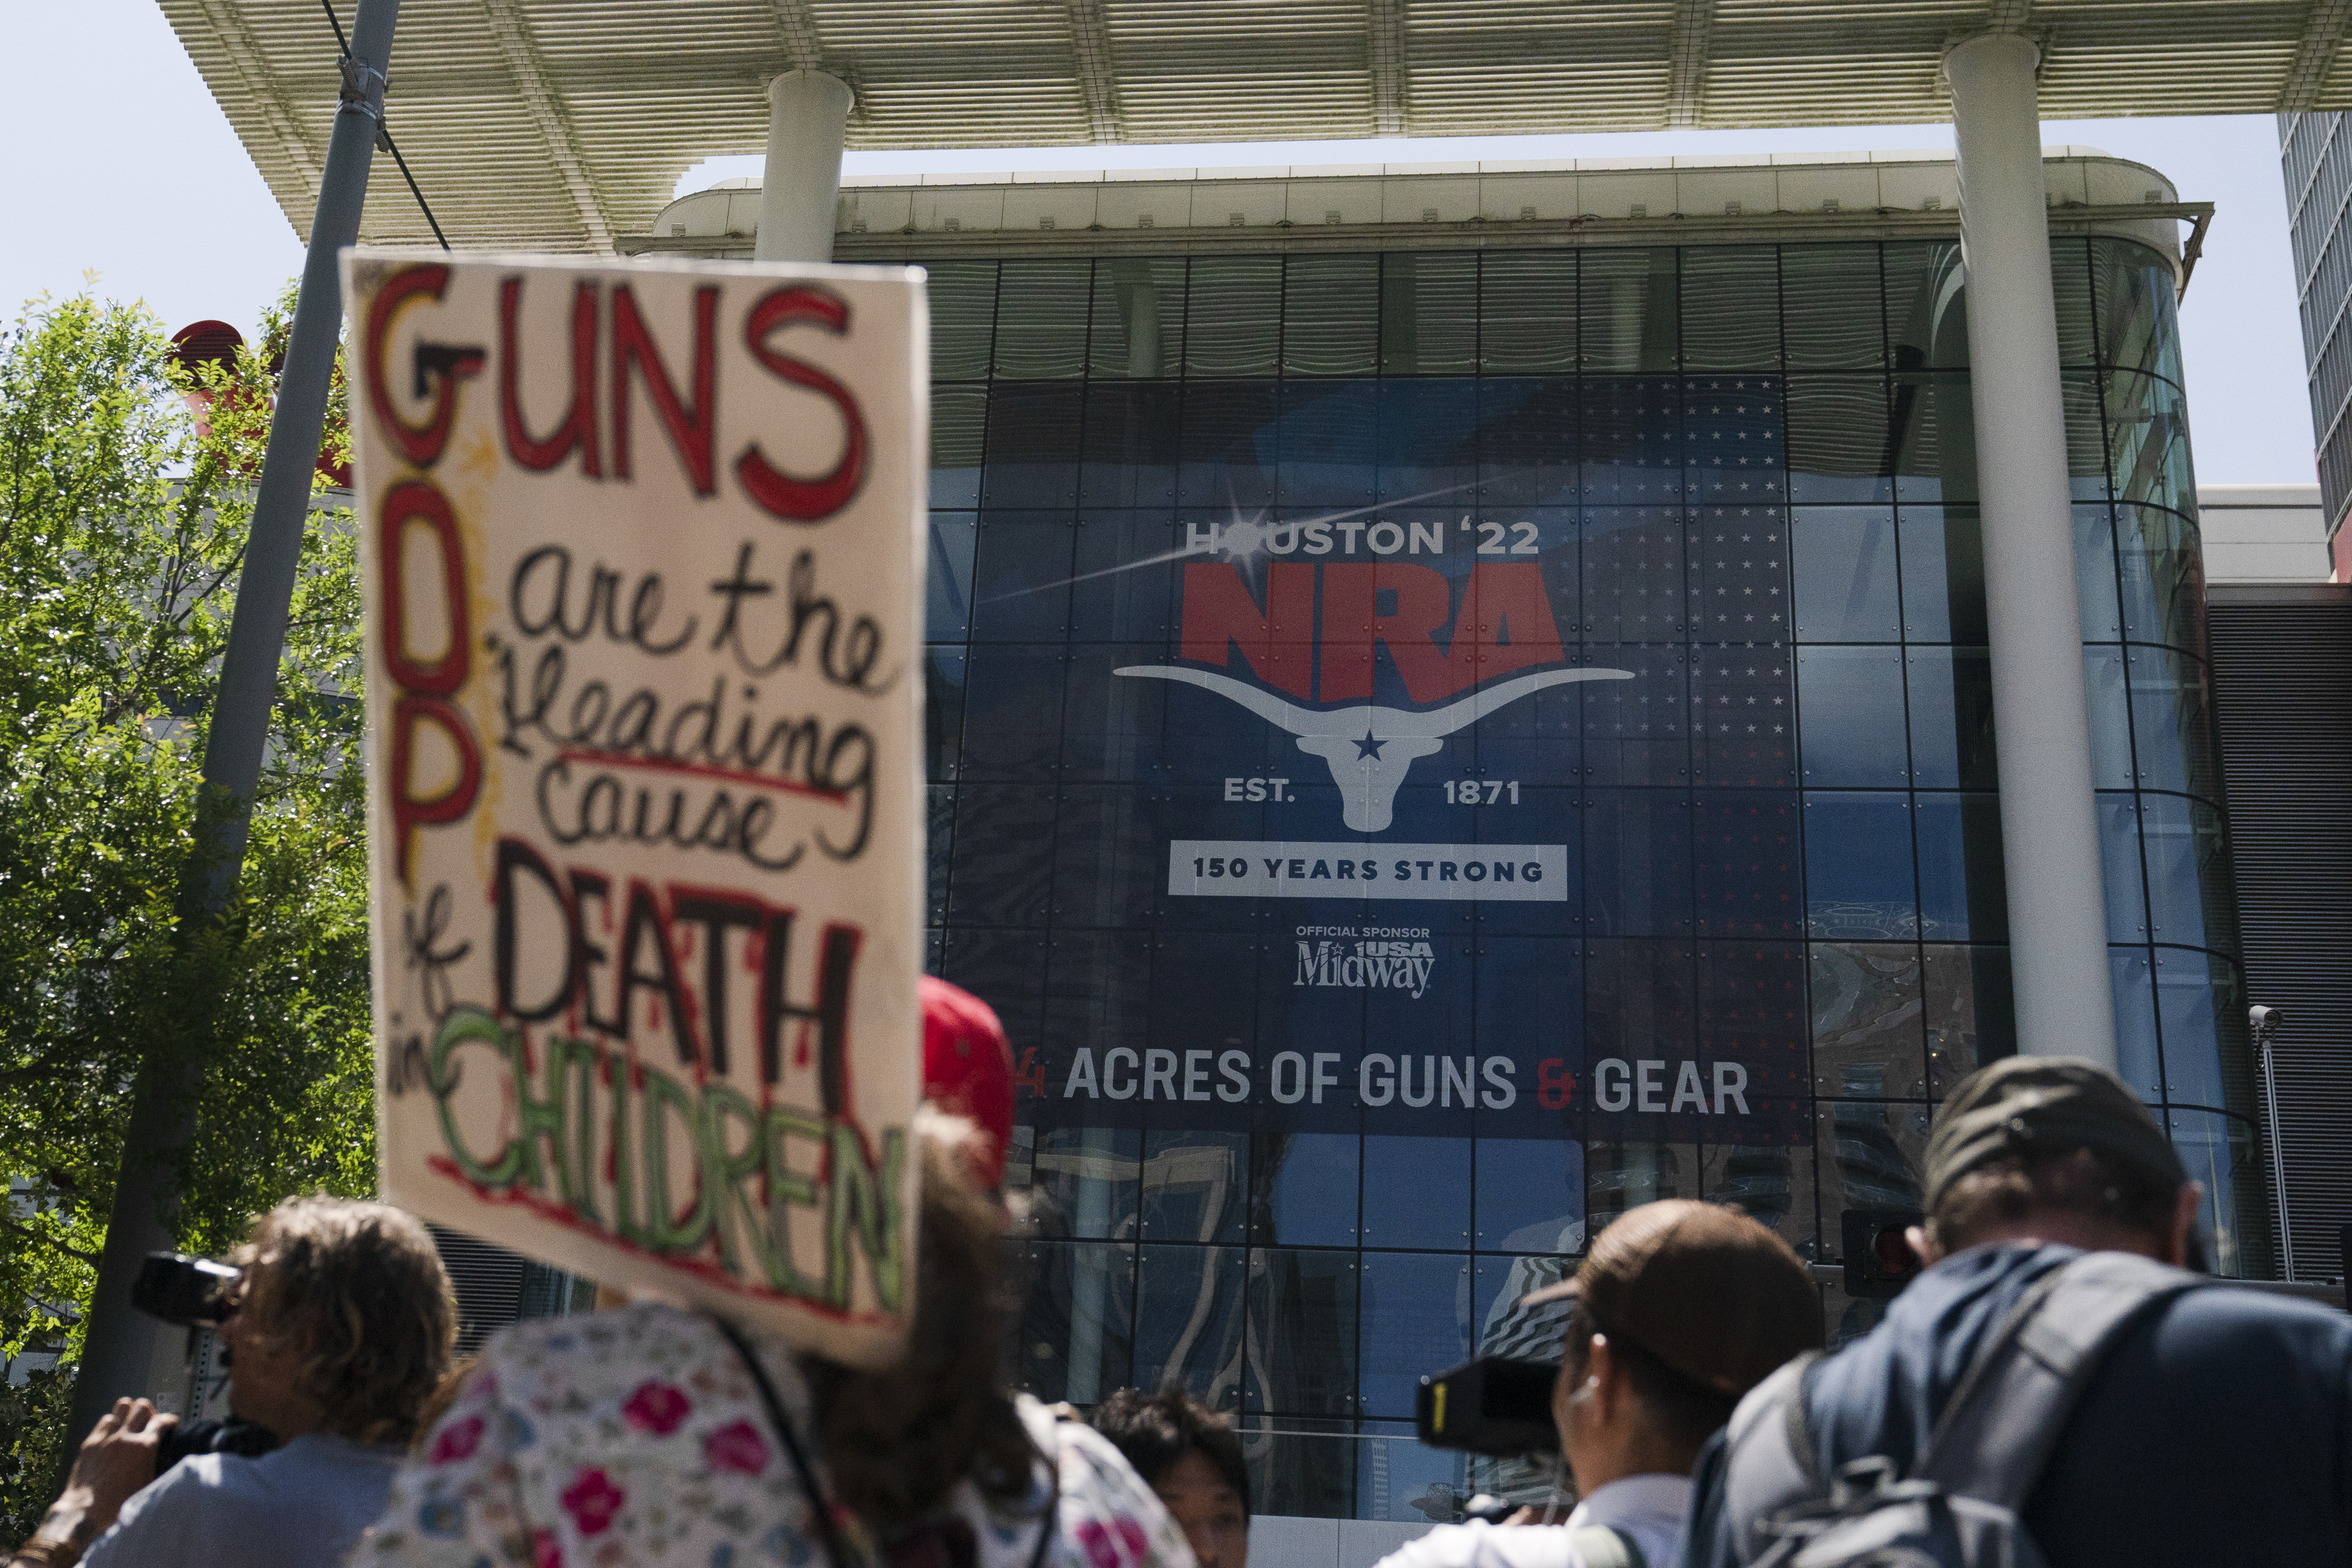 People gather outside the George R. Brown Convention Center to protest the National Rifle Association's annual meeting in Houston, Friday, May 27, 2022. (AP Photo/Jae C. Hong)